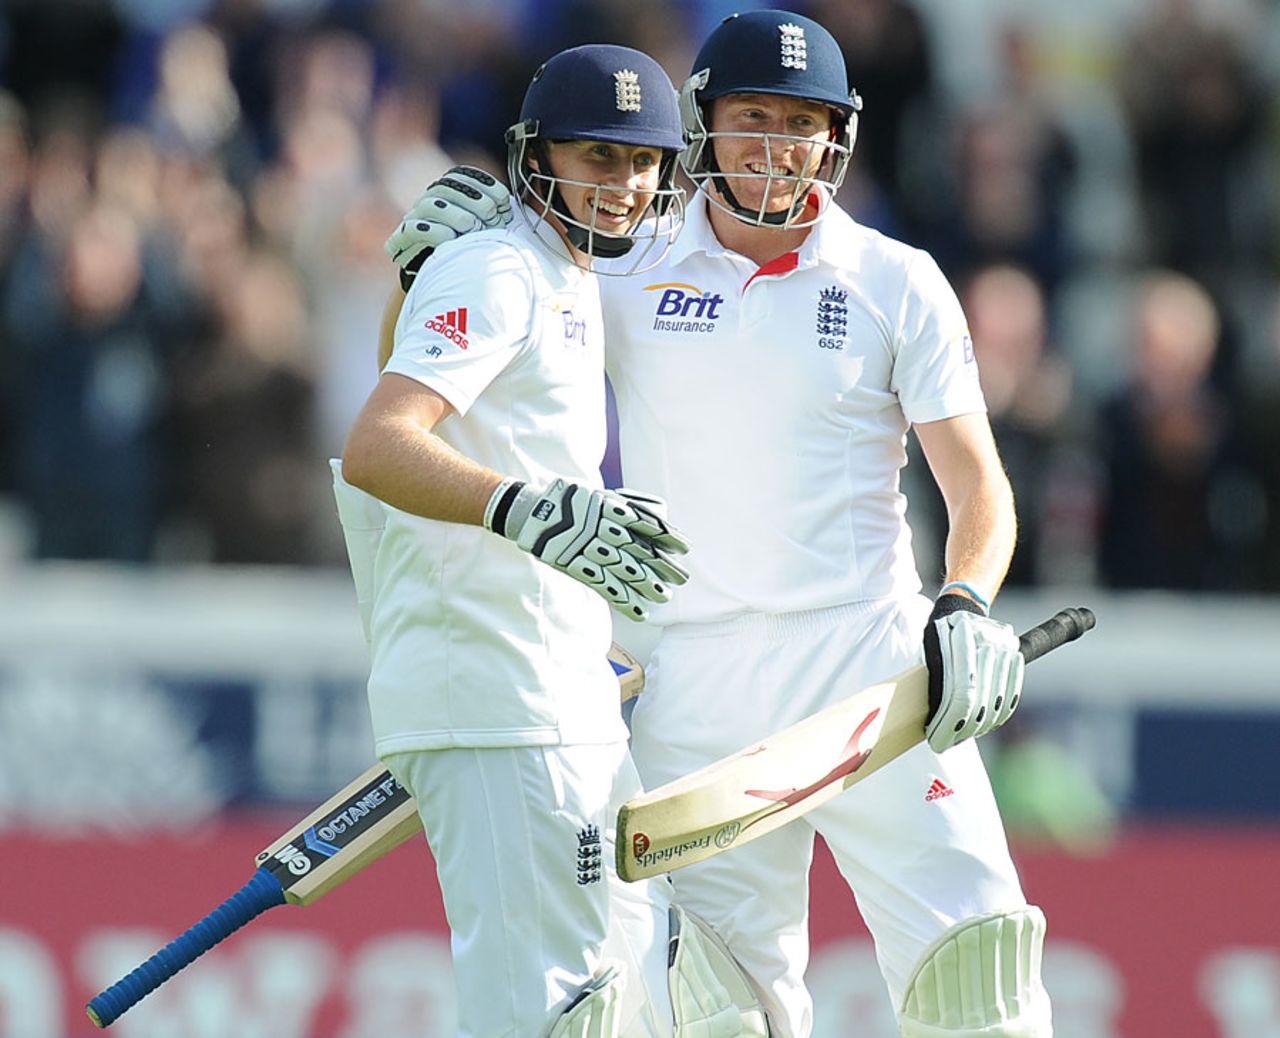 White rose: Joe Root gets congratulated by his Yorkshire team-mates Jonny Bairstow, England v New Zealand, 2nd Investec Test, Headingley, 2nd day, May 25, 2013